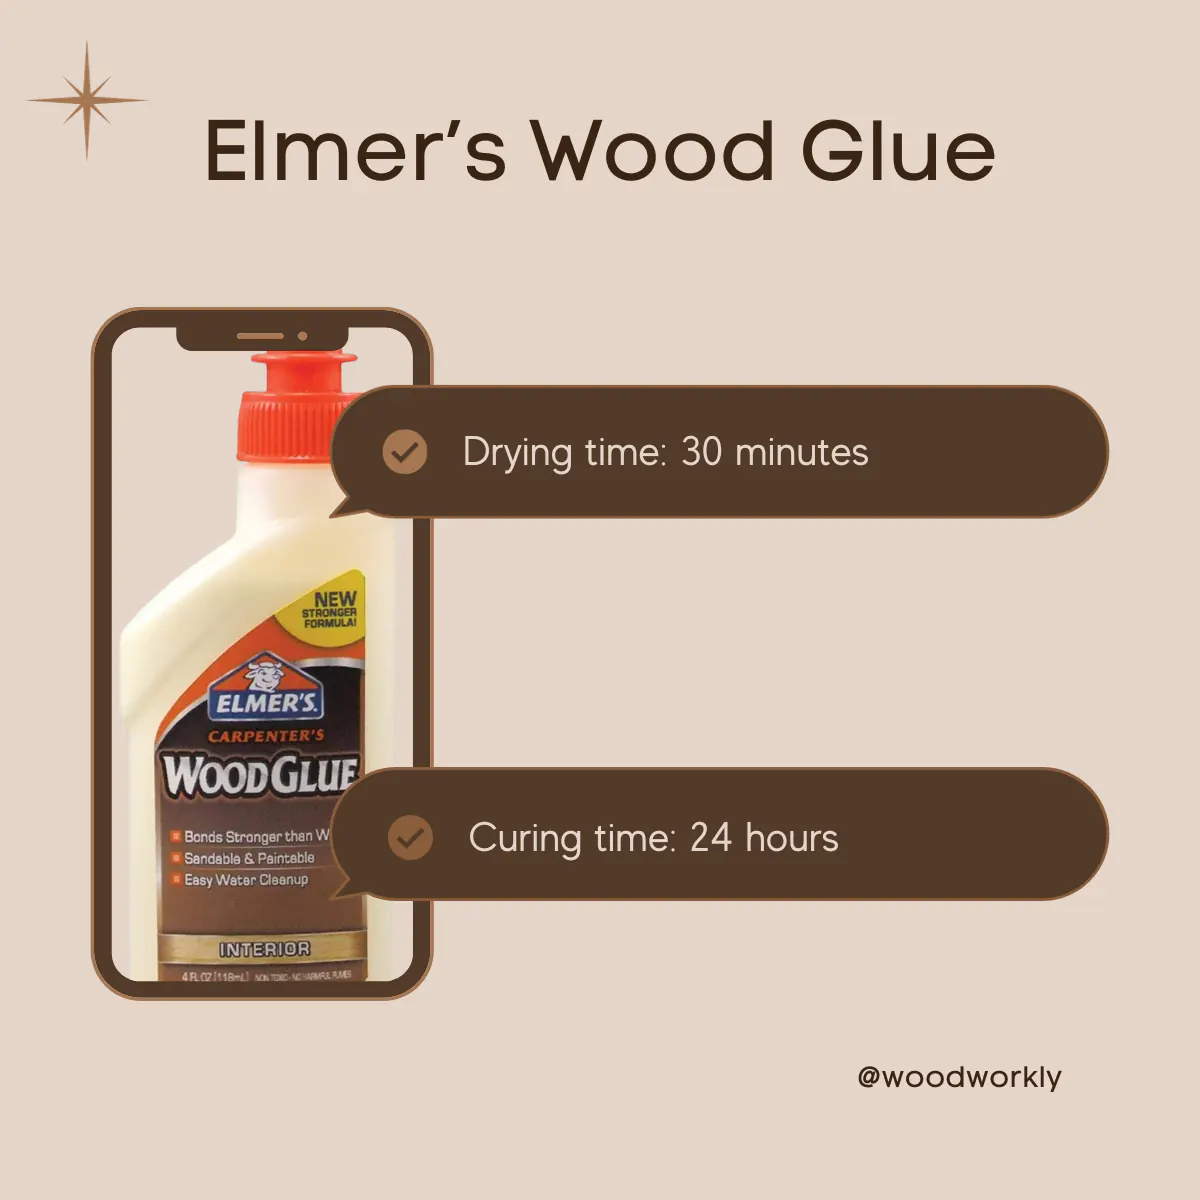 Elmer’s Wood Glue drying time and curing time